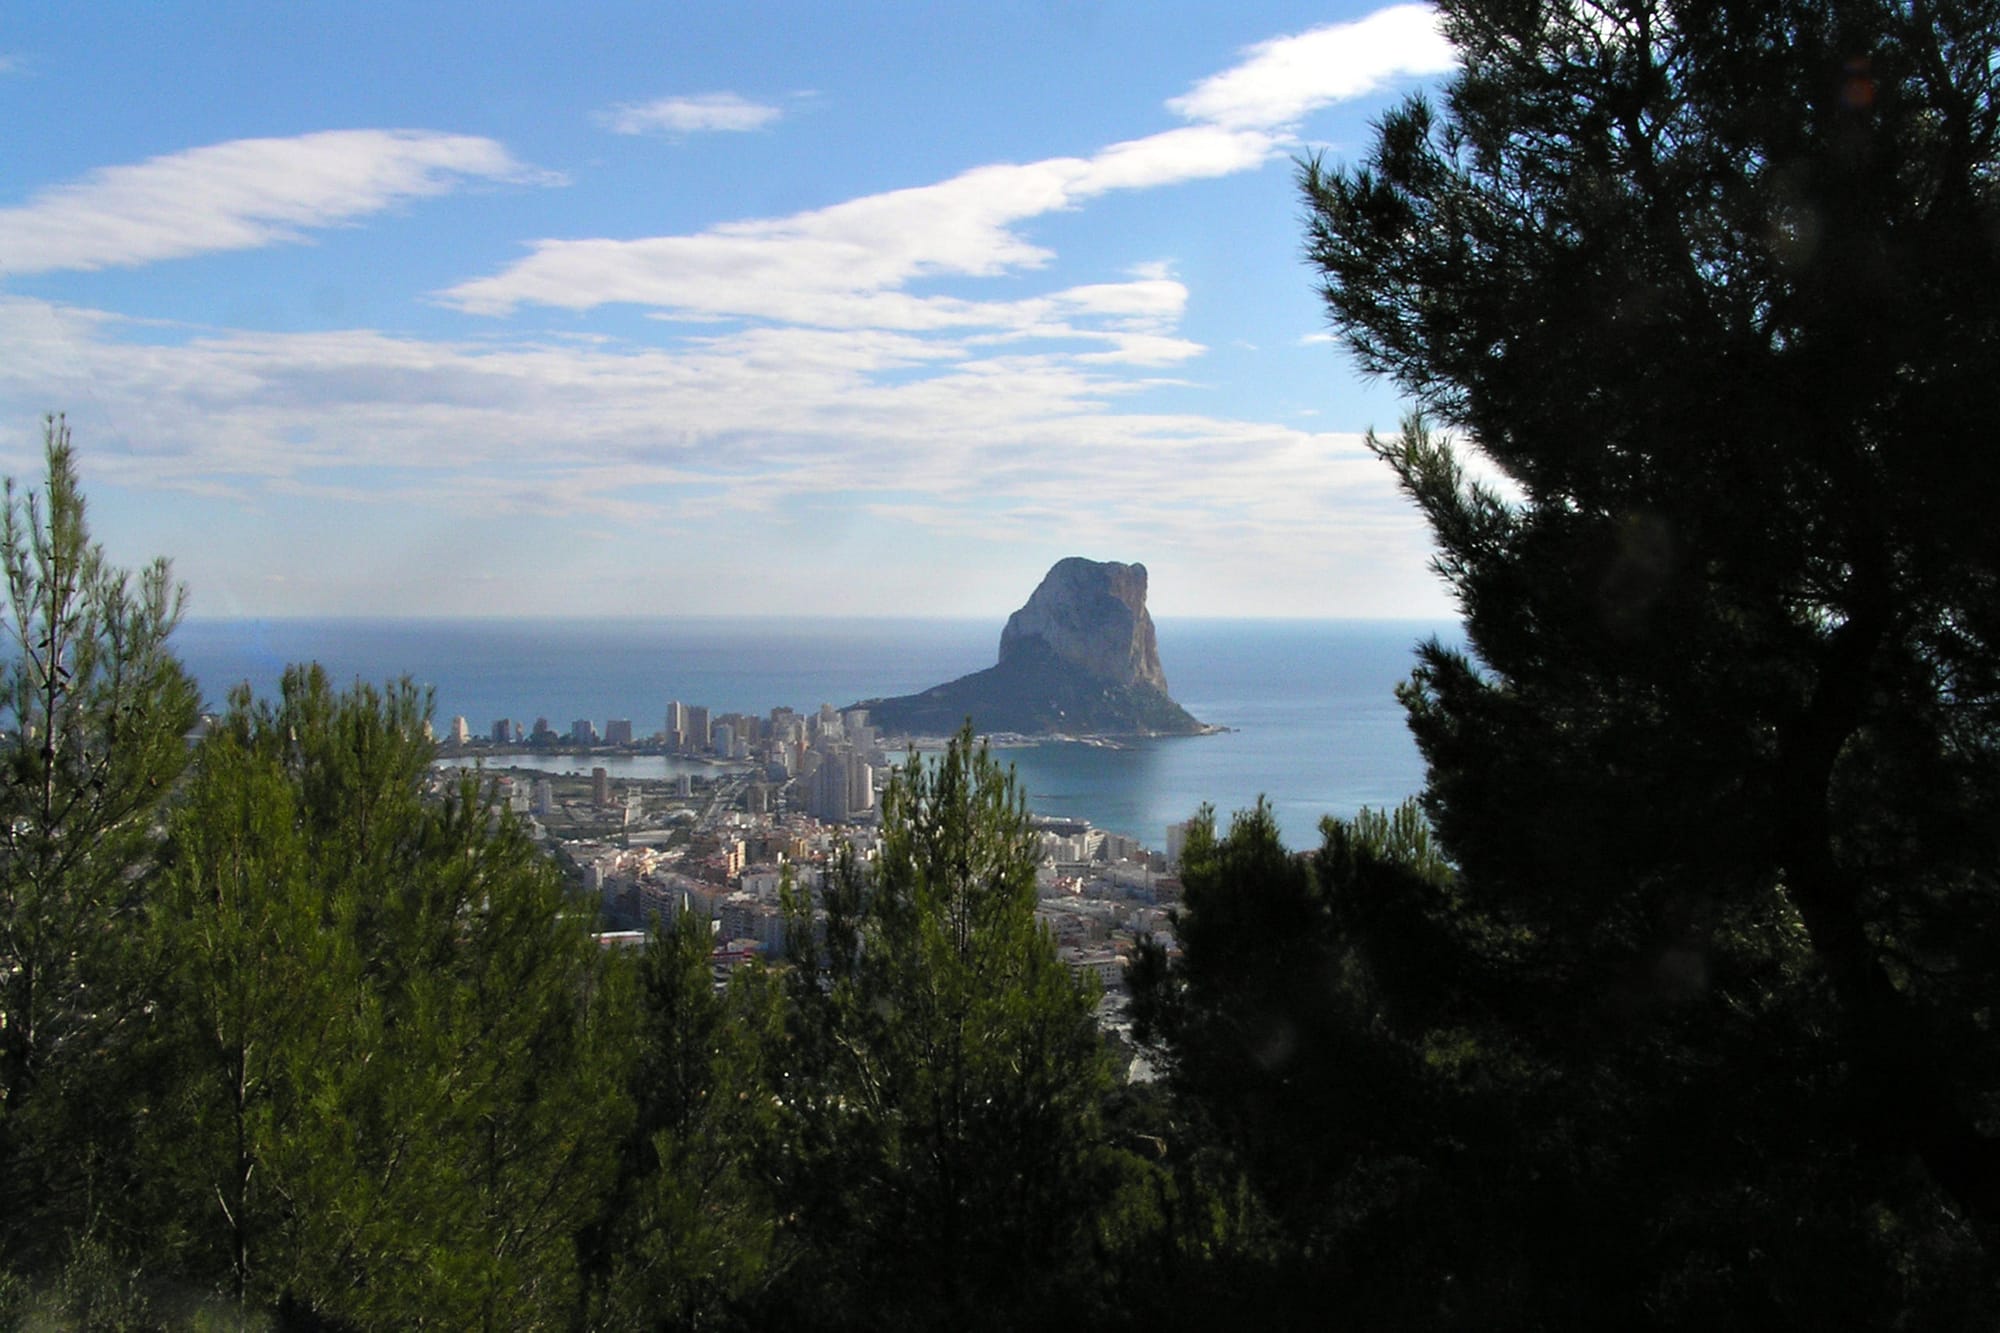 Oltà mountain is a Natural Park in Calpe